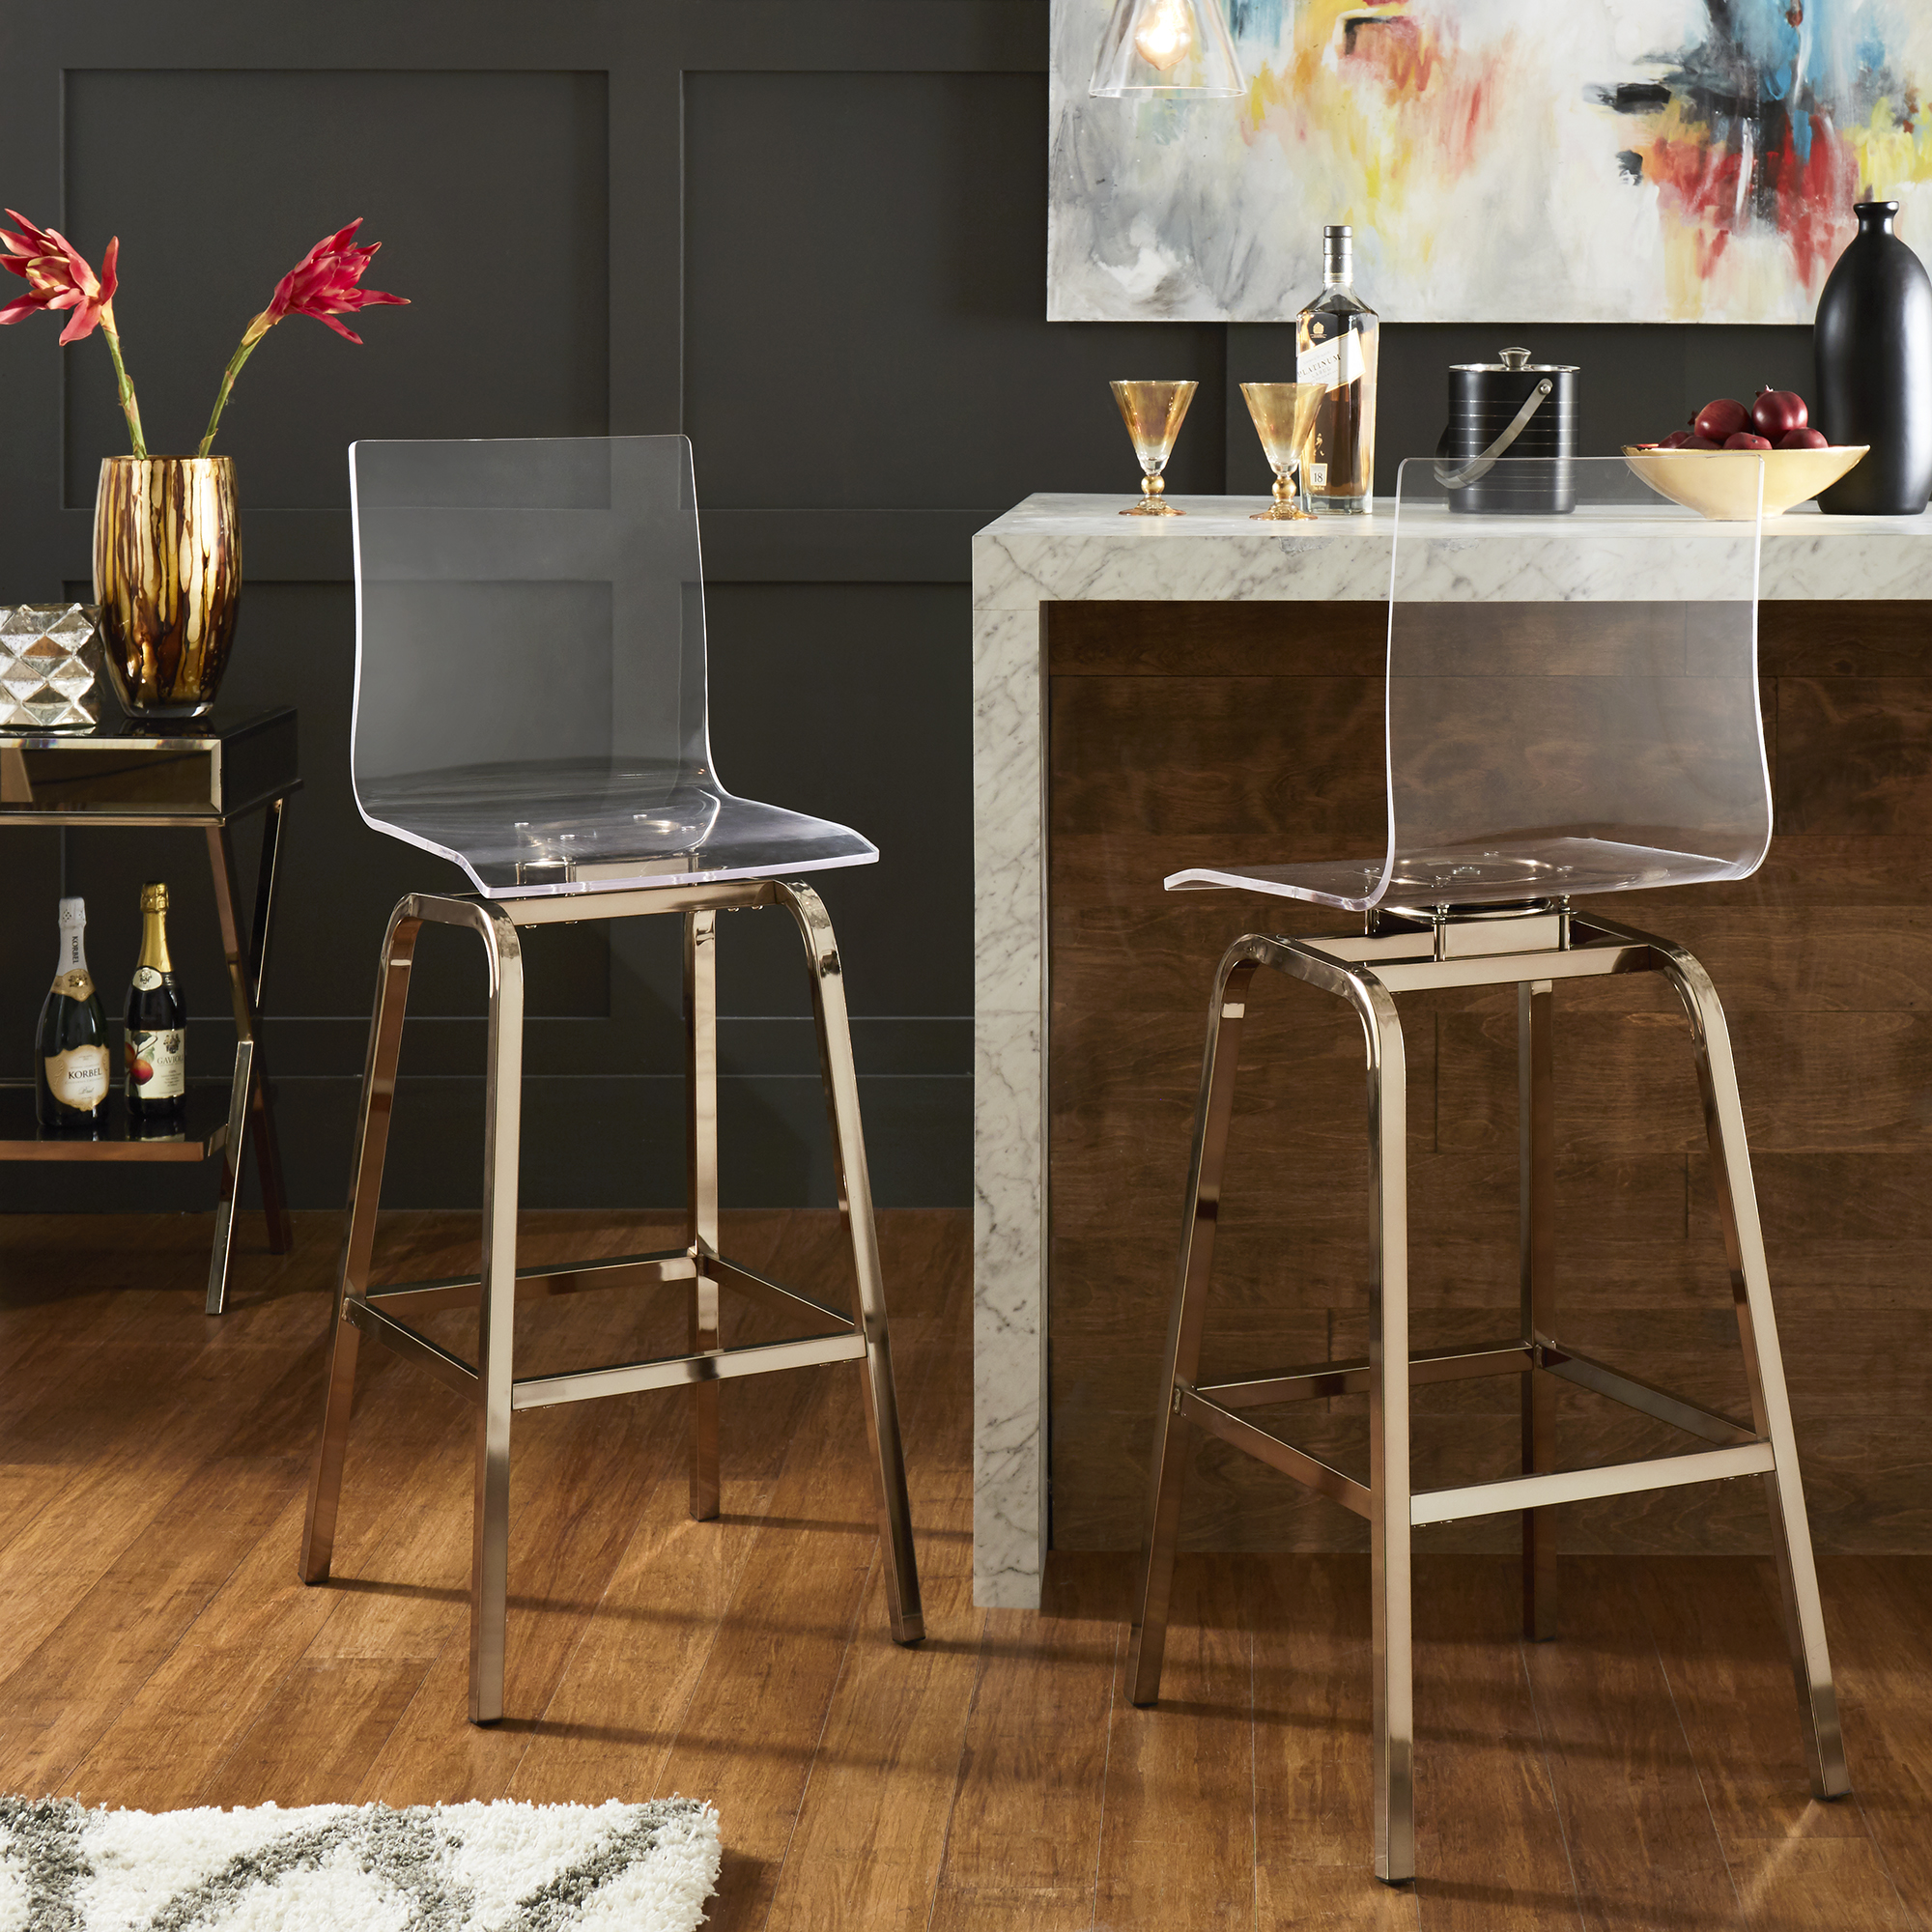 What may surprise some people is that one common furniture material is acrylic. Pictured here are the Acrylic Swivel High Back Bar Stools (Set of 2) by iNSPIRE Q Bold. The seats of these stools are made entirely with acrylic while the metal bases are finished in shiny champagne gold.